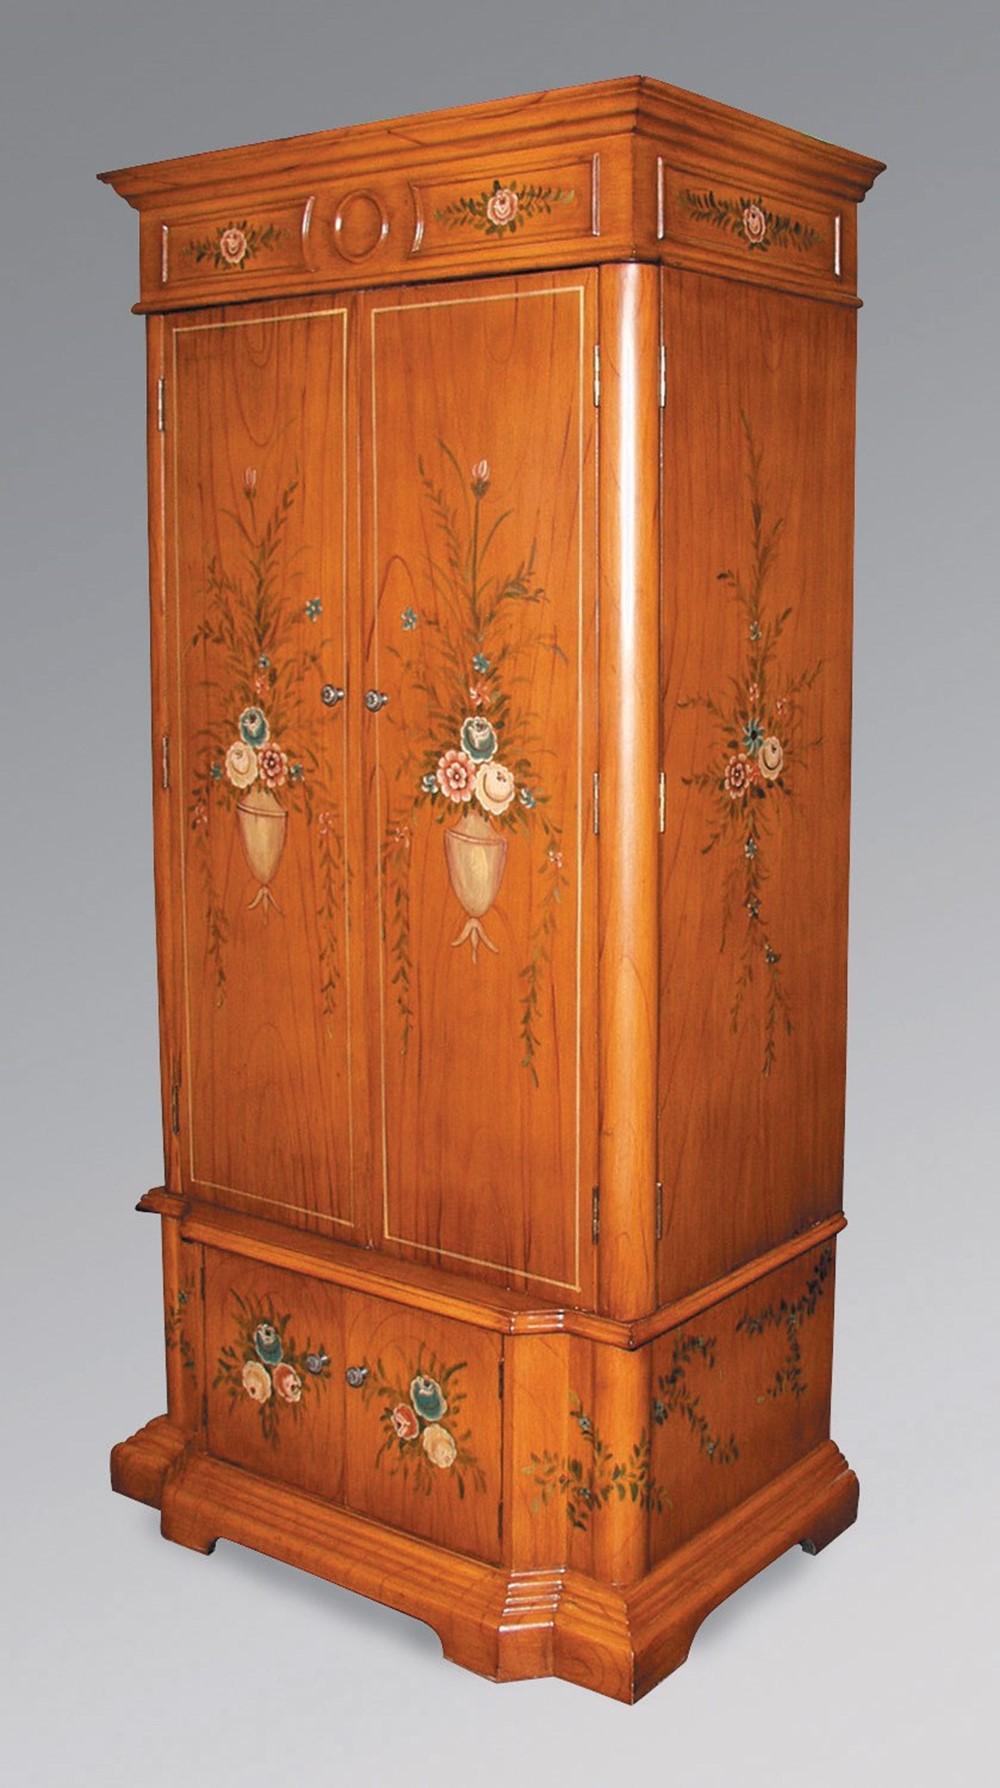 

    
Old World Oak Wardrobe Dresser With Floral Design AA Importing 47530 Classic
